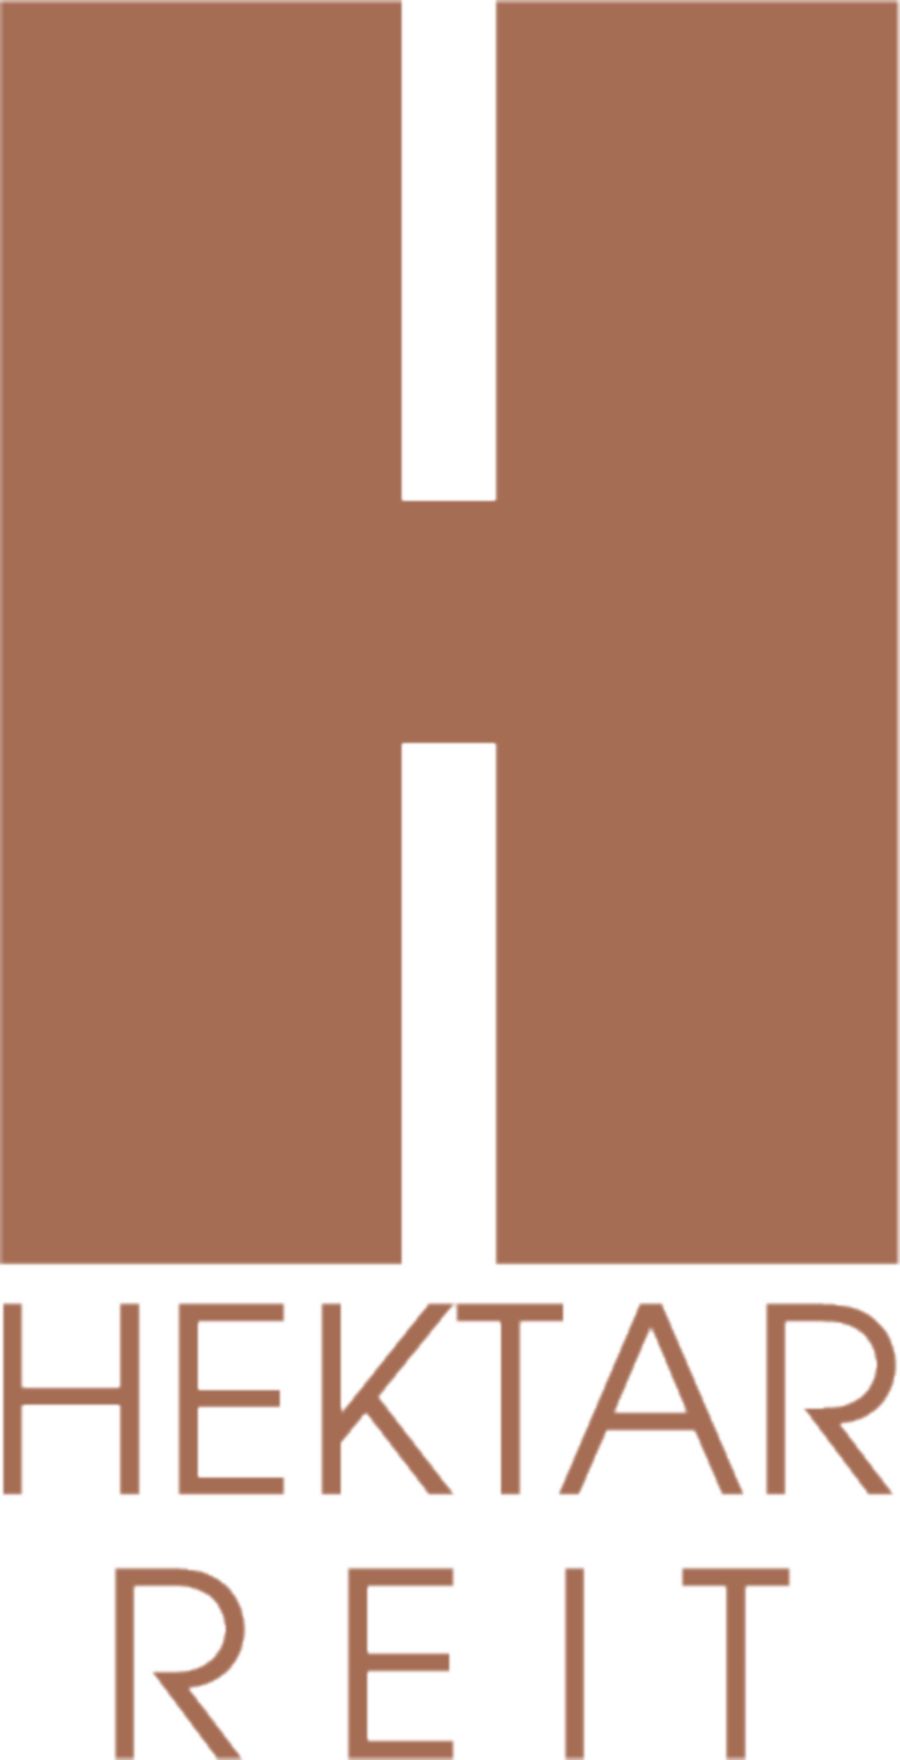 Hektar Real Estate Investment Trust's (Hektar REIT) decision to acquire Kolej Yayasan Saad Melaka (KYSM) reflects its commitment to pursue growth in the environmental, social, and governance (ESG) sectors of new business landscapes.